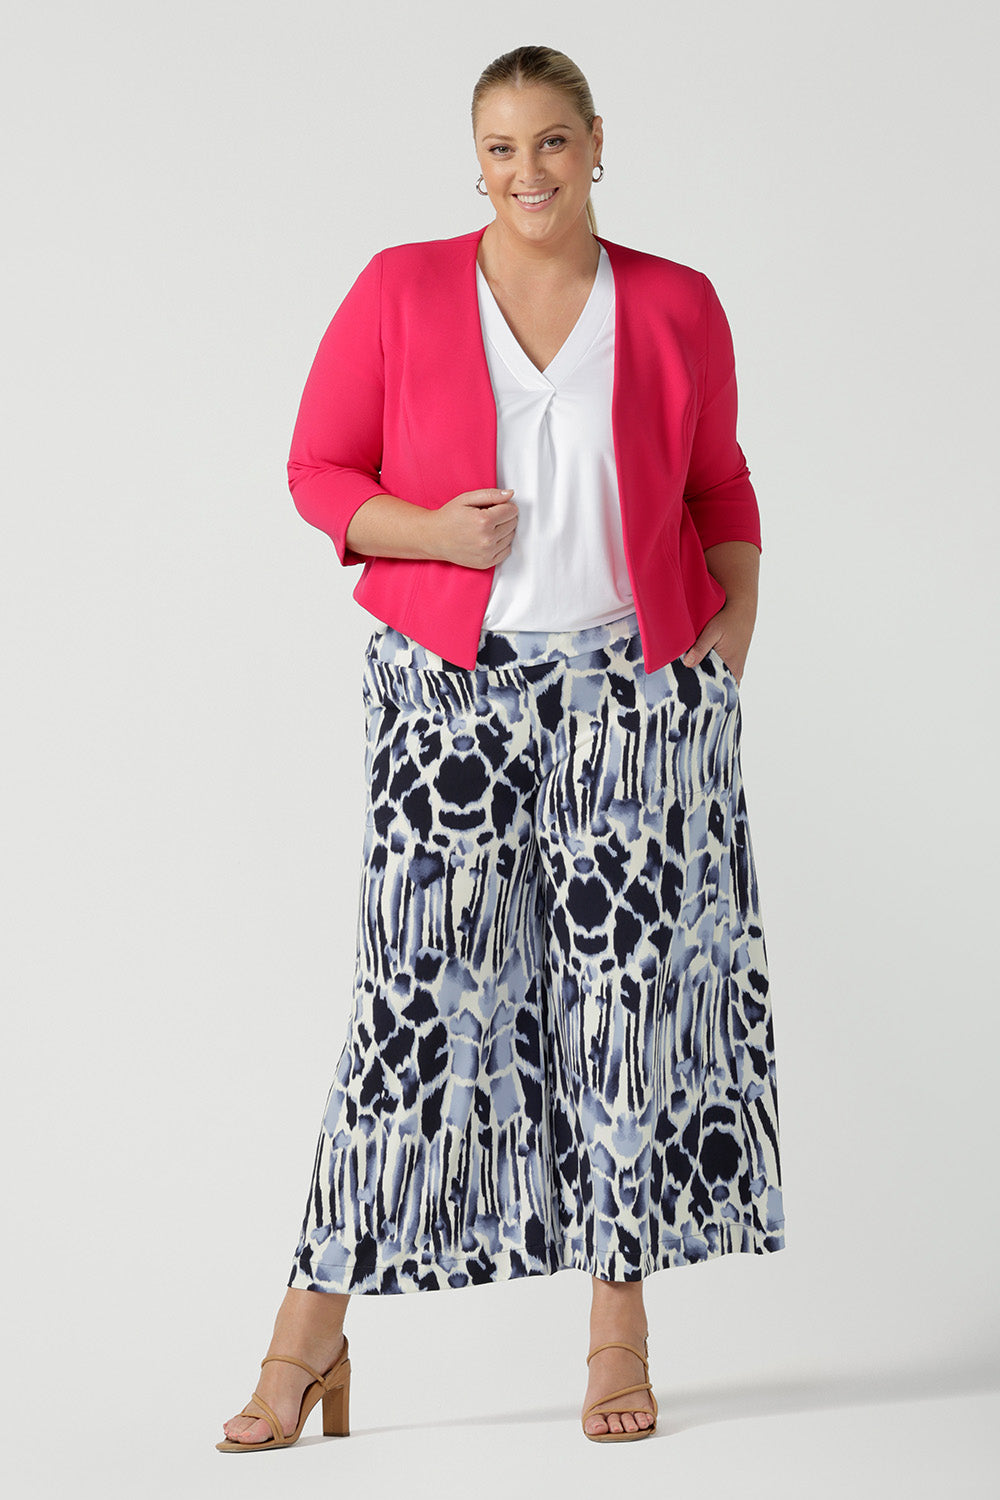 A size 18, plus size woman wears cropped, wide leg culotte pants in blue and white print with a short sleeve, white top in bamboo jersey and a work jacket in watermelon pink. Styled as summer work pants, these culottes are easy care and comfortable for office wear  as well as casual wear. Made in Australia by Australian women's clothing brand, Leina & Fleur